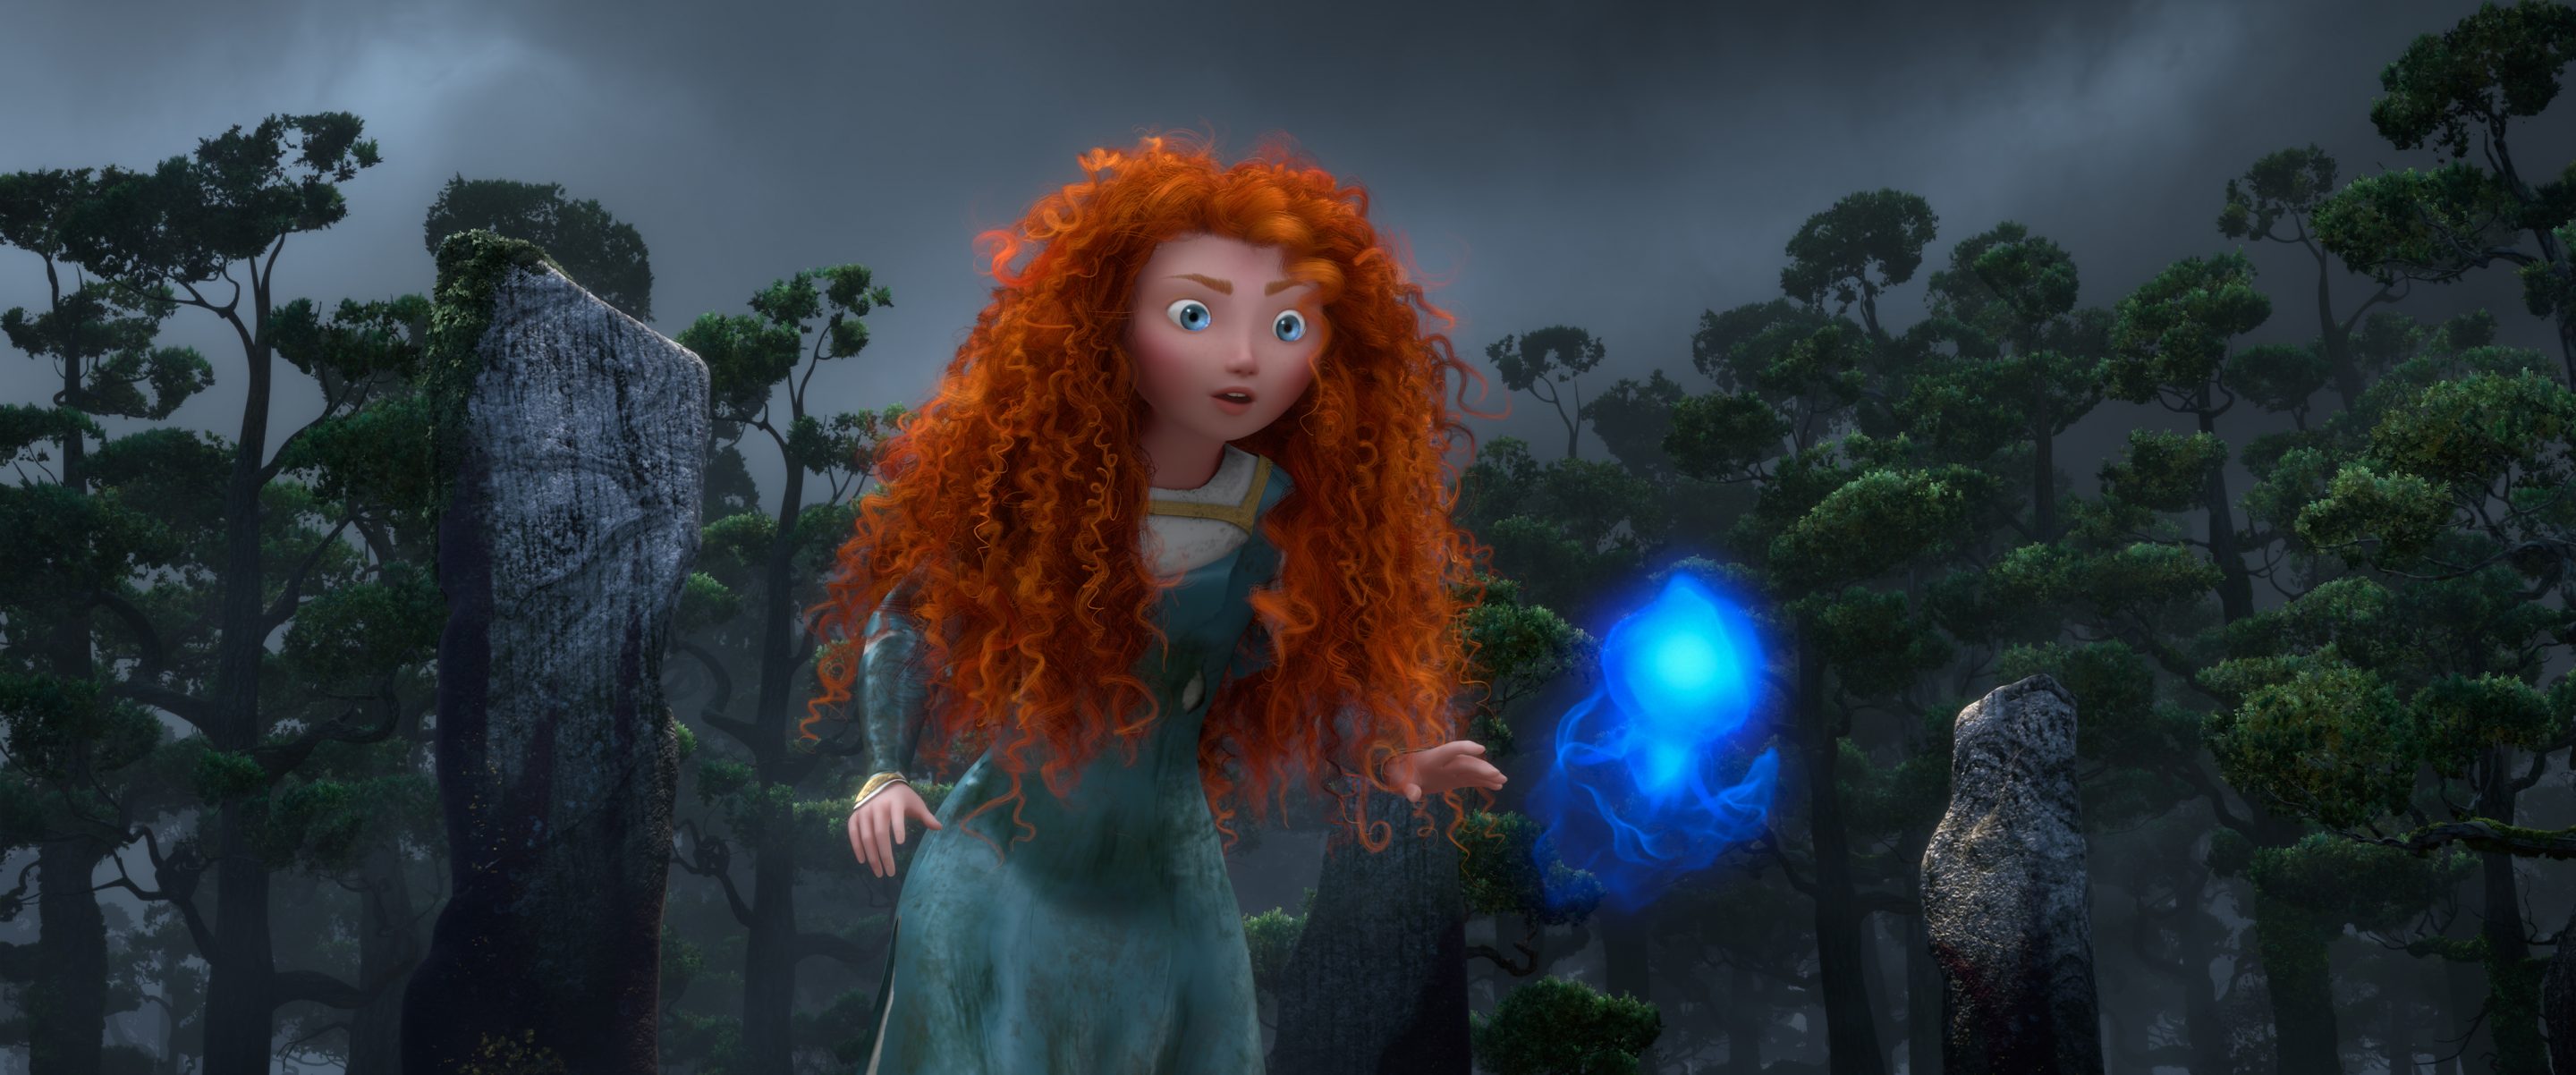 anthony sing recommends Brave Full Movie Free